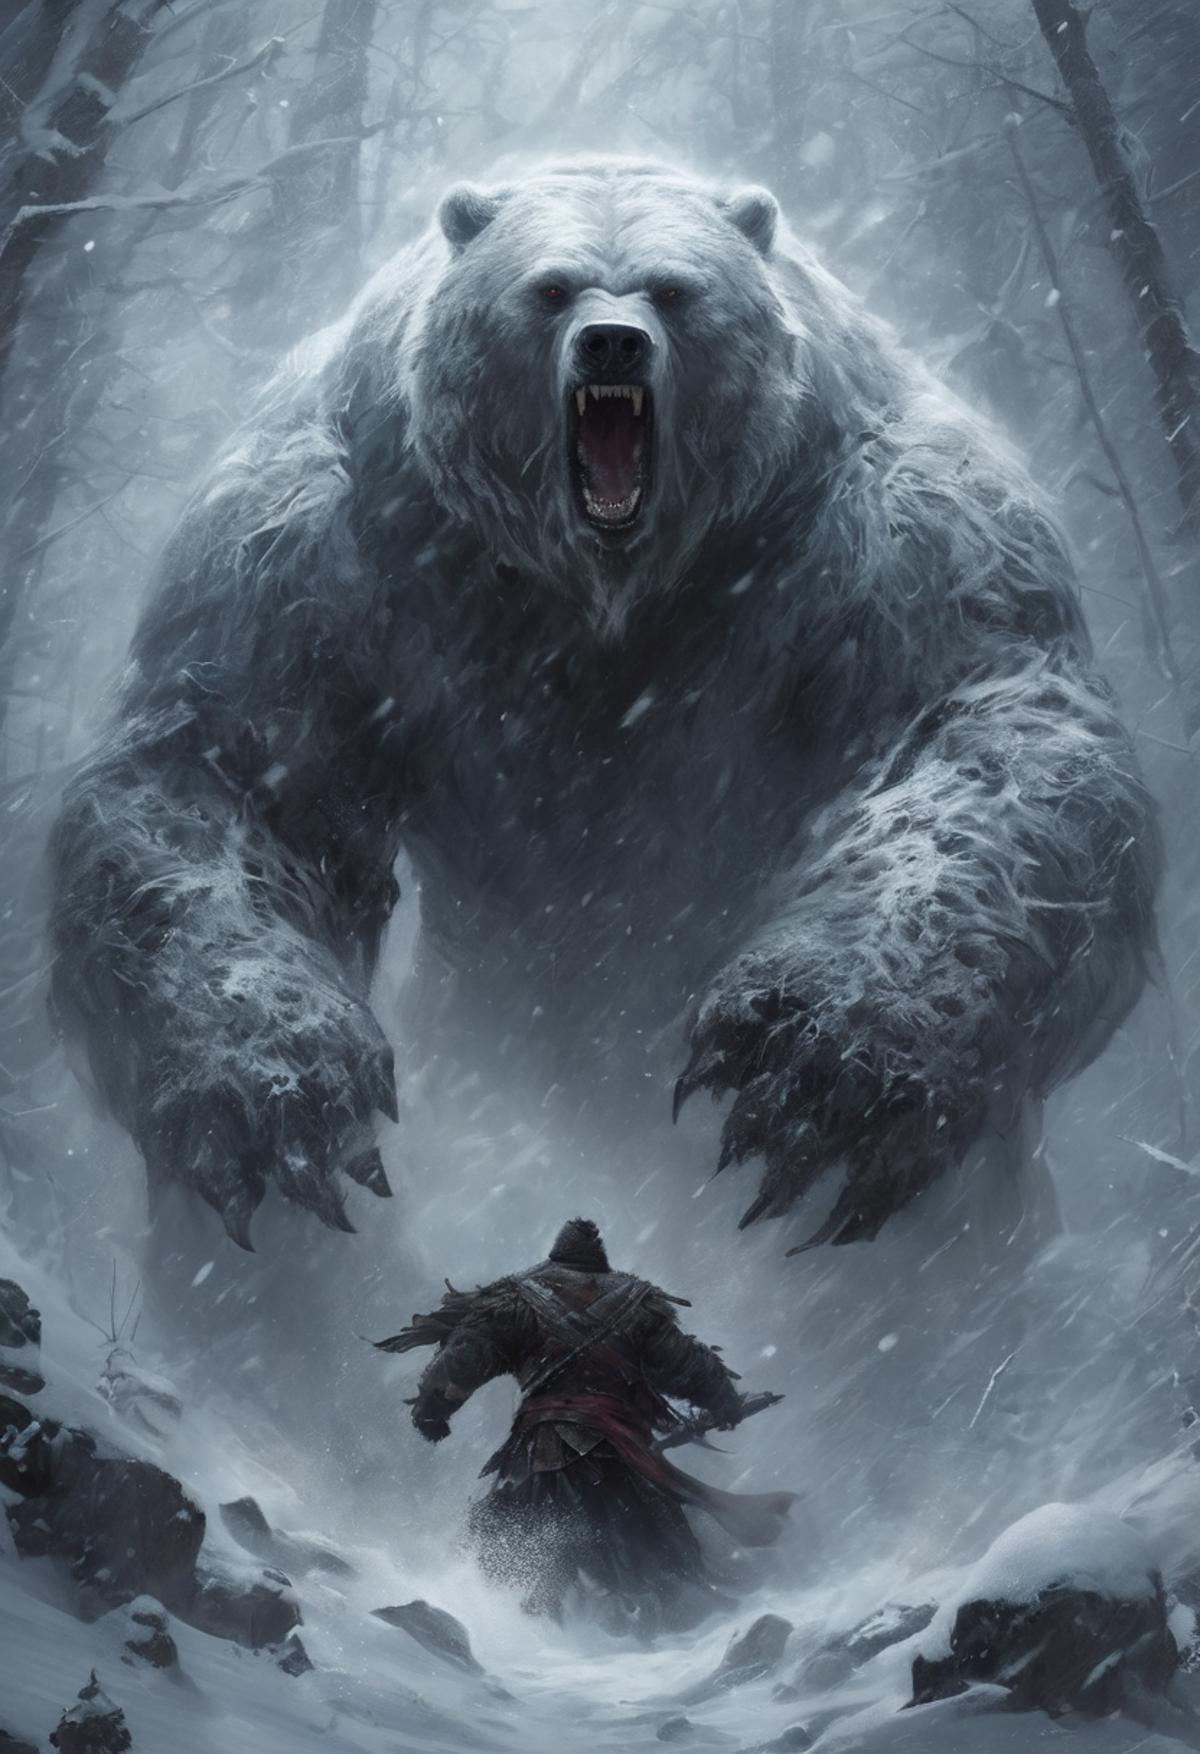 A man is running from a large, angry polar bear in a snowy forest.